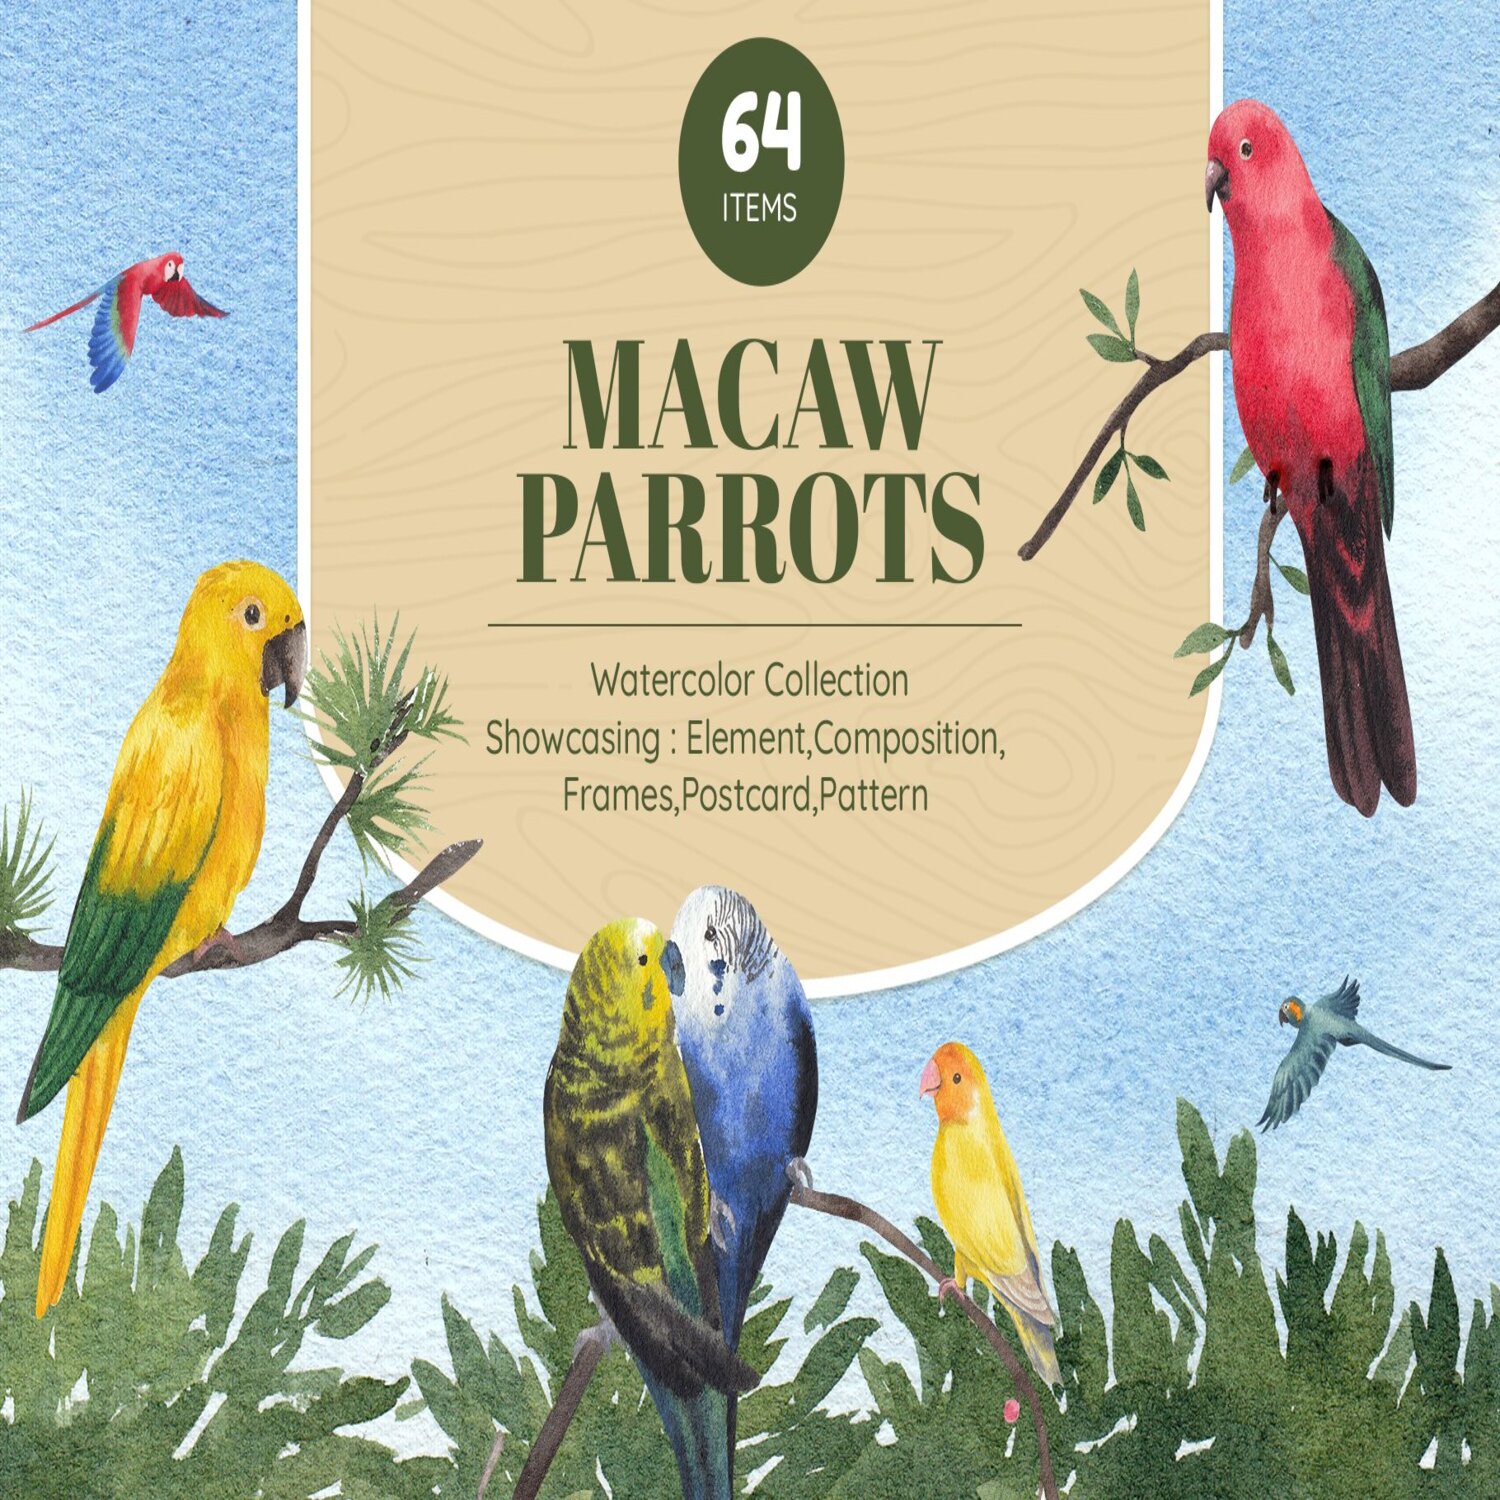 Macaw Parrots Watercolor cover.